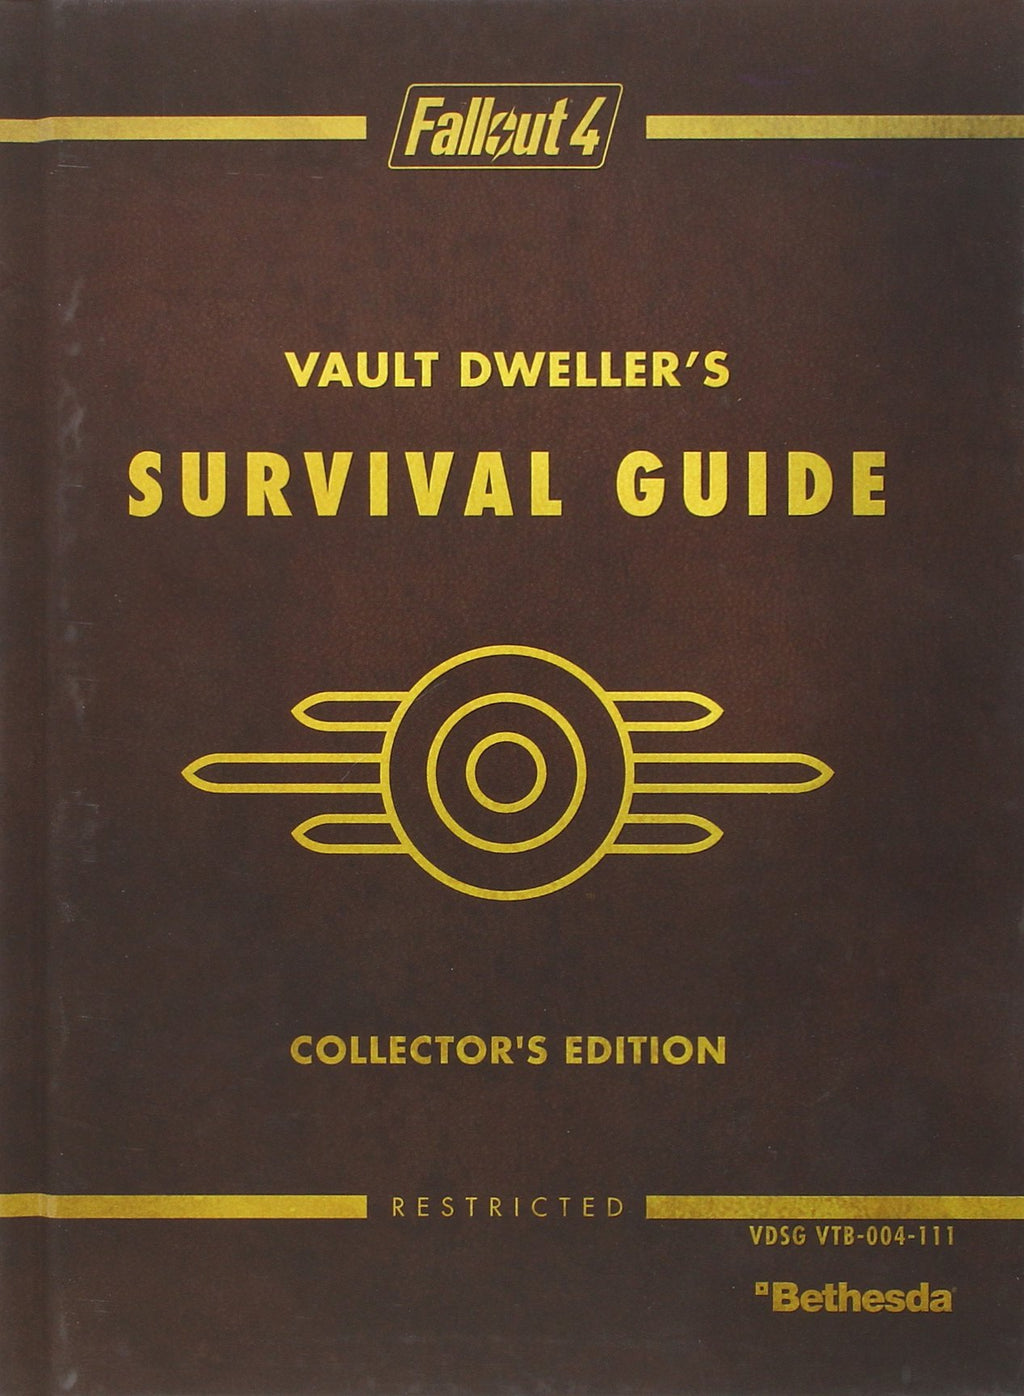 Fallout 4 Vault Dweller's Survival Guide Collector's Edition: Prima Official Game Guide Hardcover